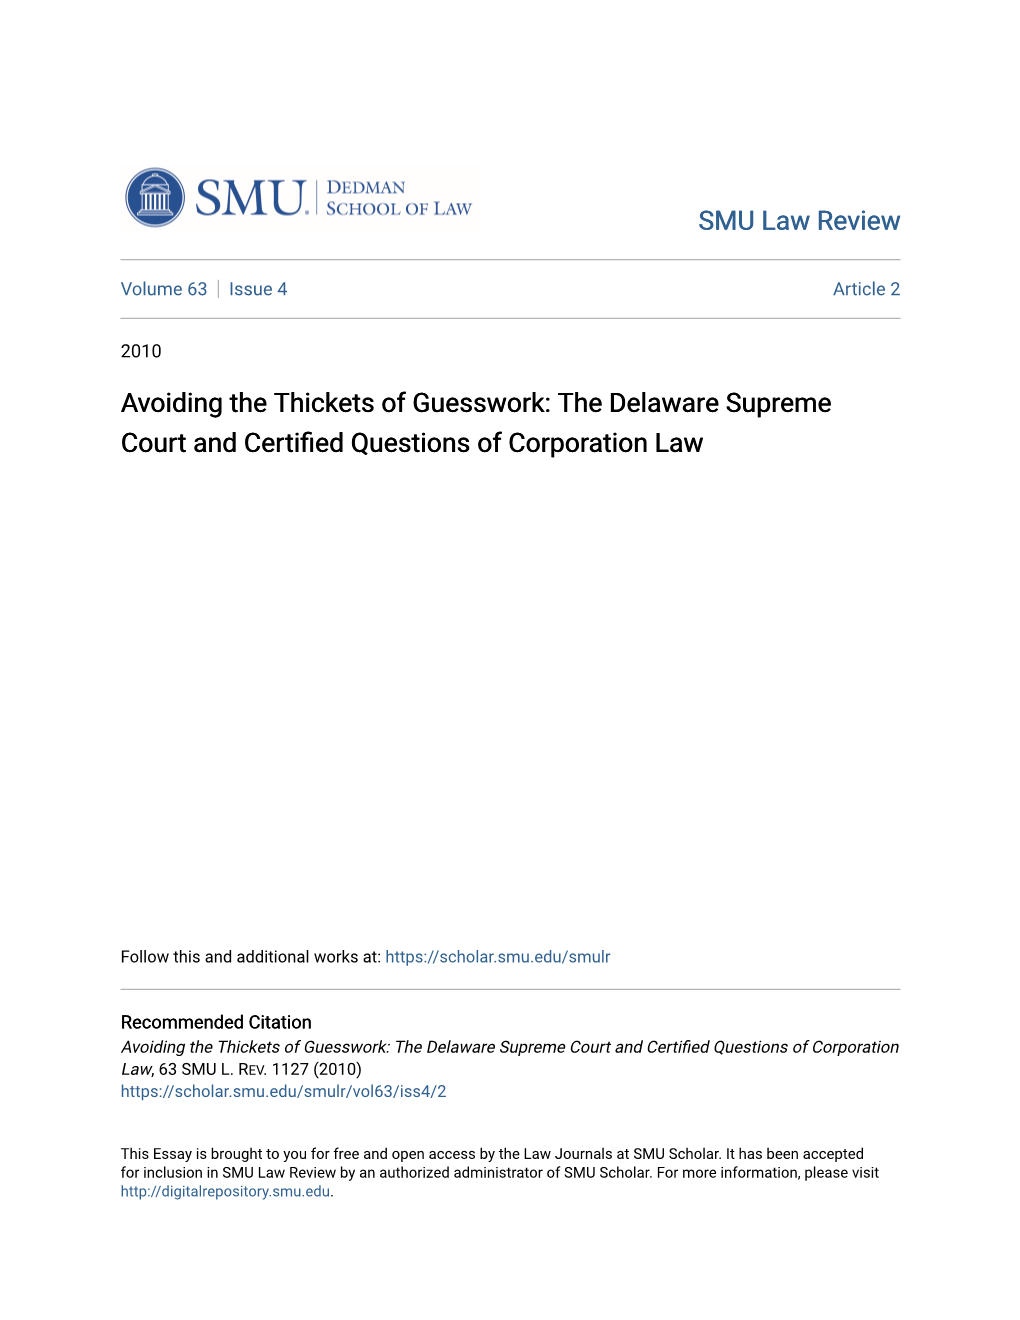 The Delaware Supreme Court and Certified Questions of Corporation Law